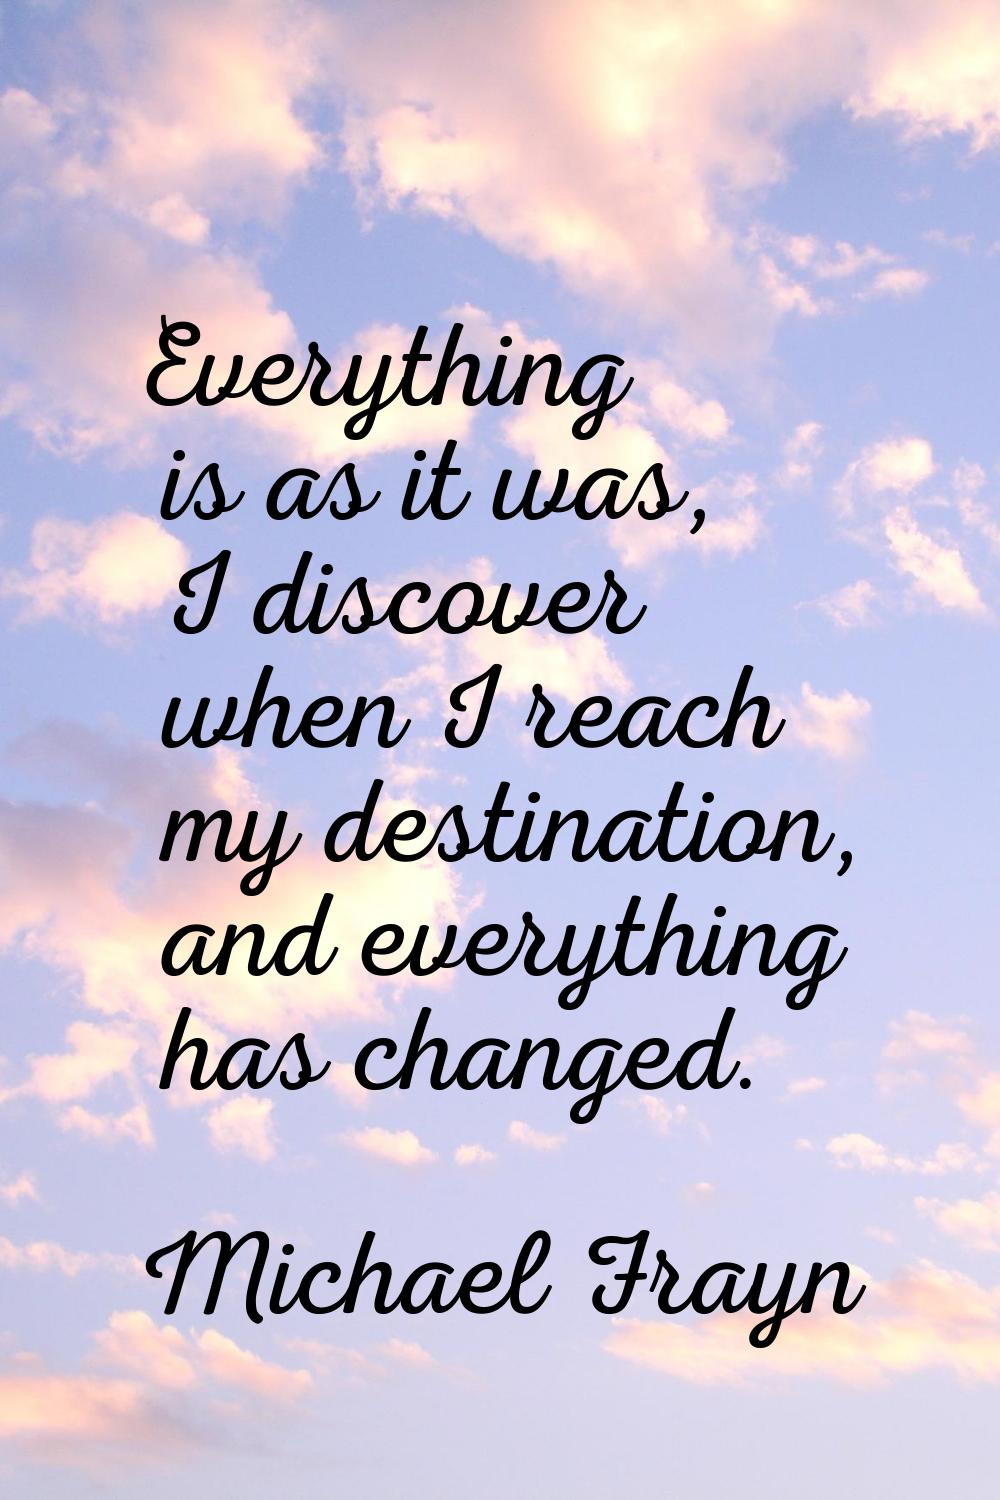 Everything is as it was, I discover when I reach my destination, and everything has changed.